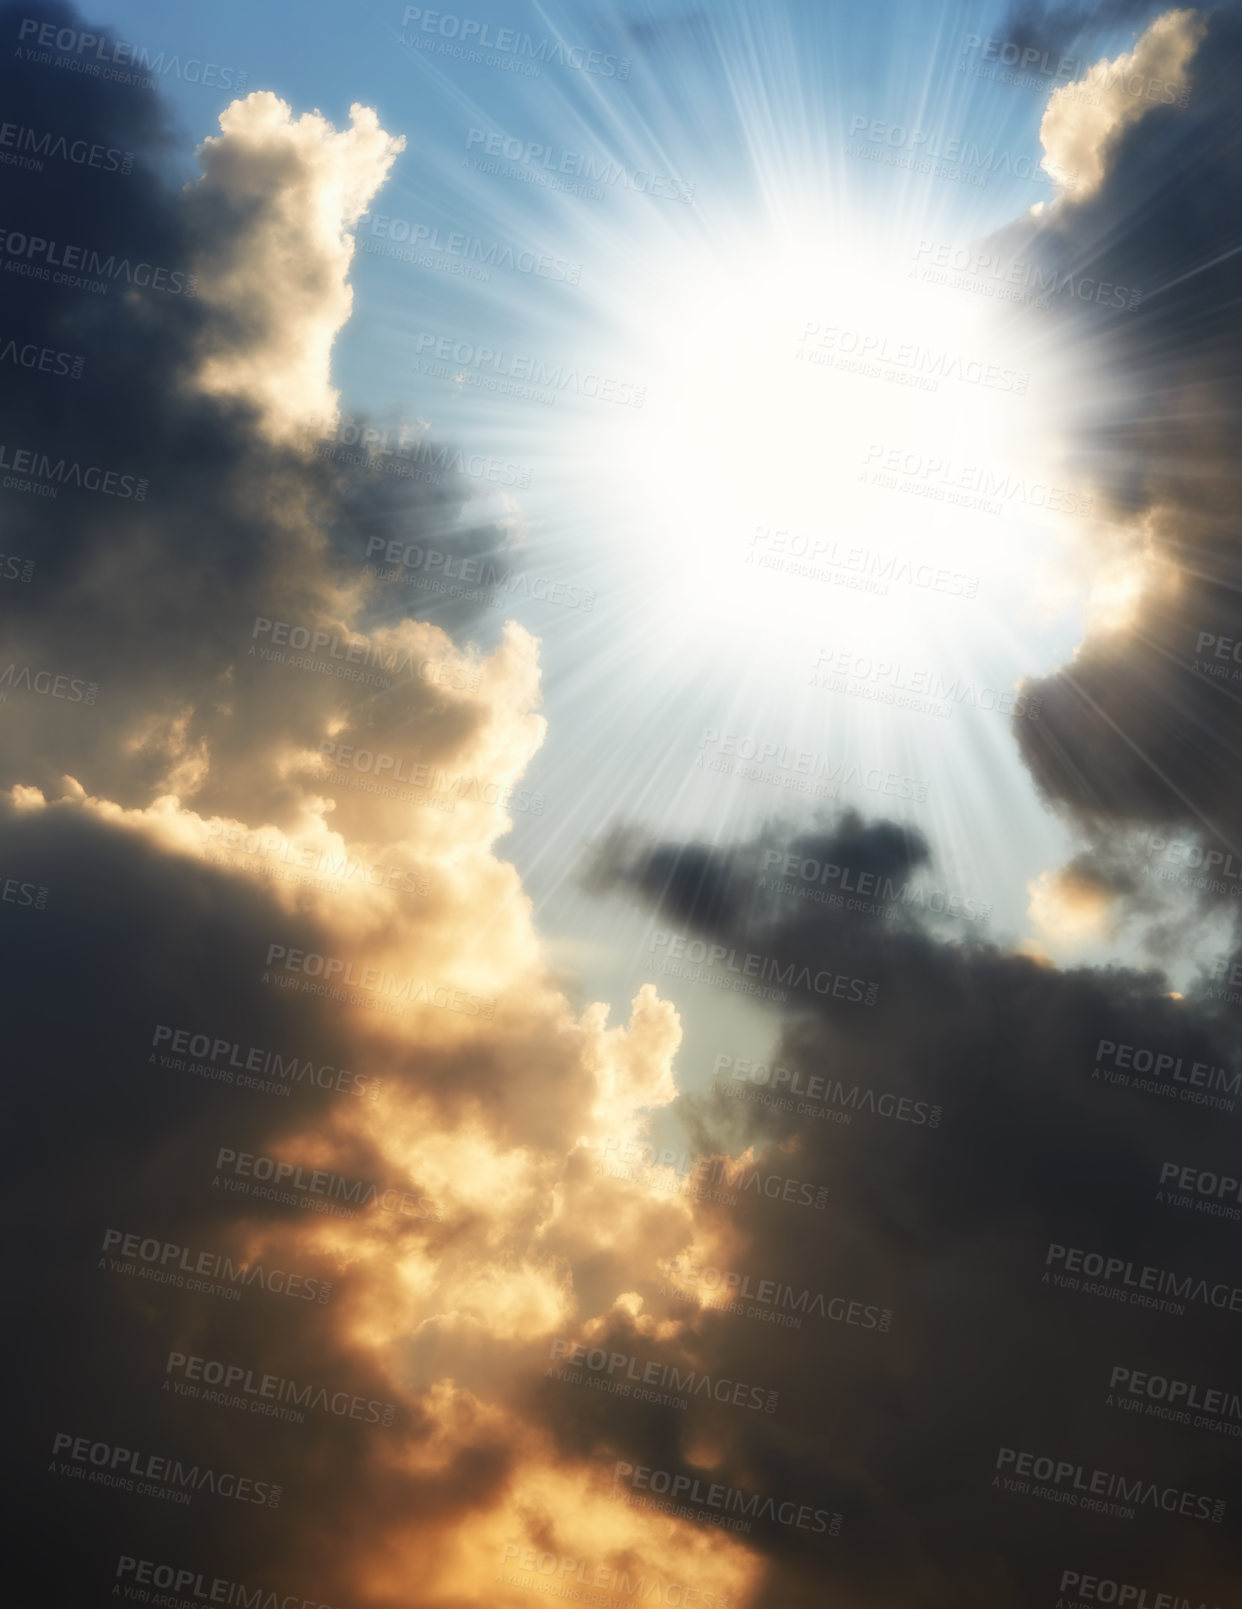 Buy stock photo Dark clouds in a sunset sky background with copy space. Cloudscape climate view of dramatic sky with signs of thunder storm on the horizon. Landscape of a lensflare sun in autumn or winter weather